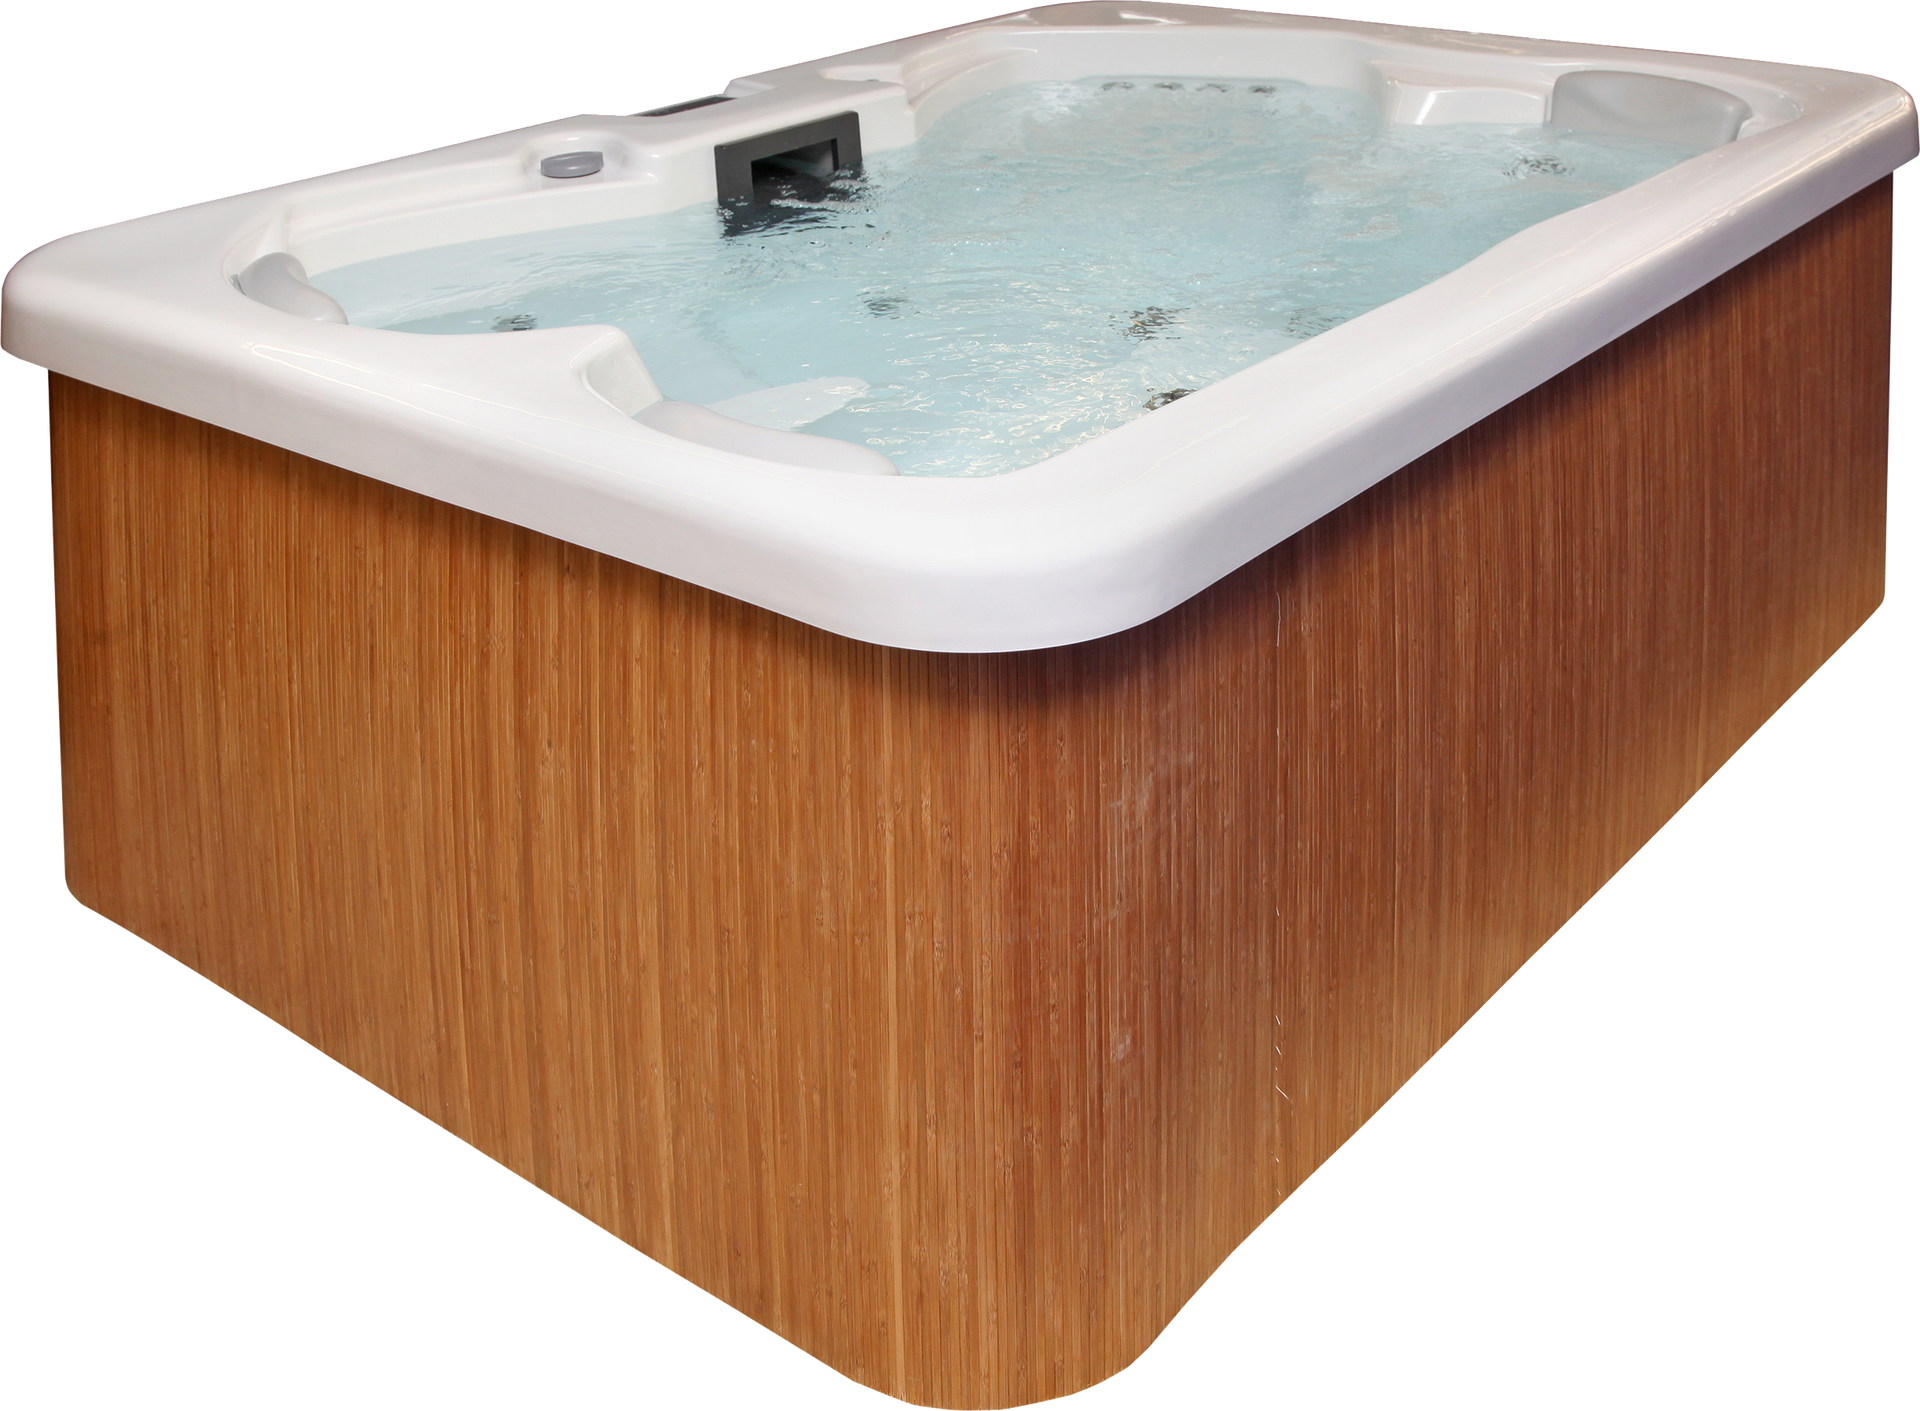 Modern hot tub with wooden frame isolated with clipping path included